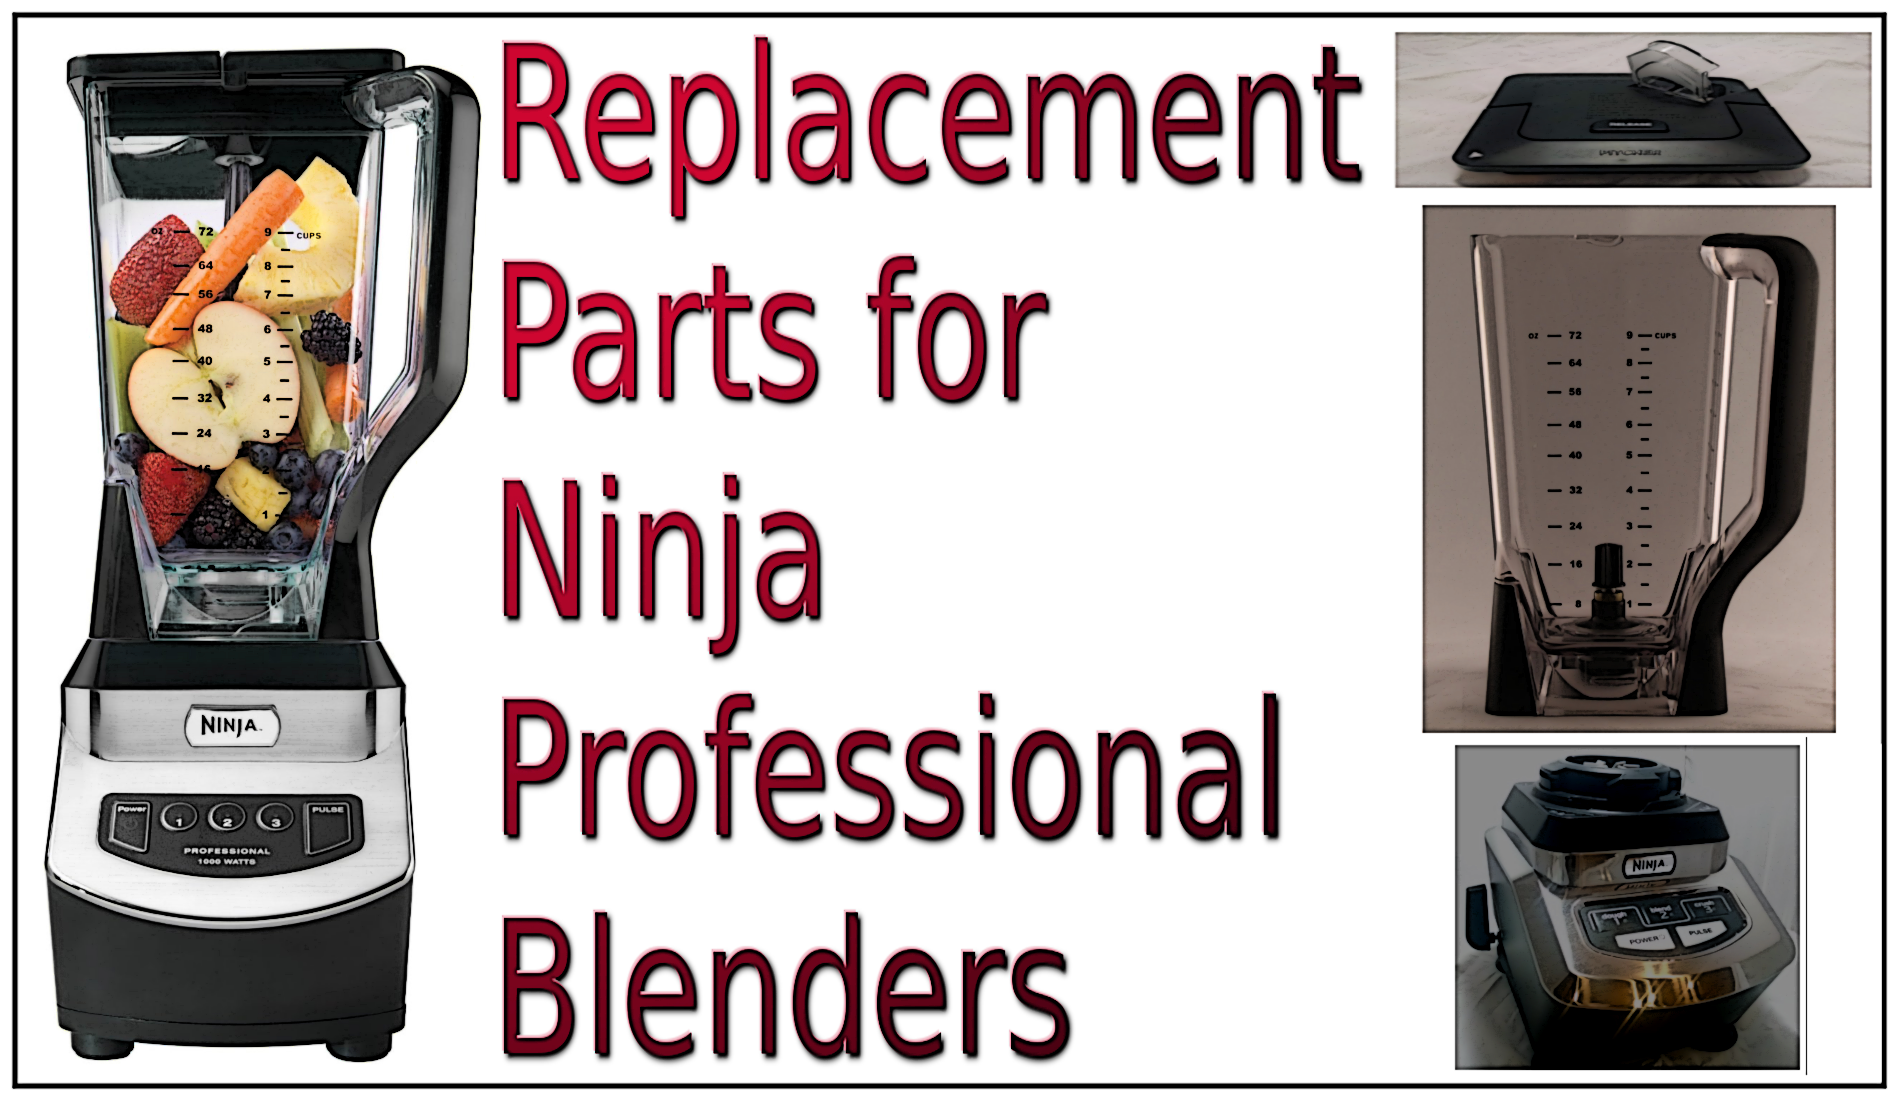 https://www.dontpinchmywallet.com/wp-content/uploads/2016/05/replacementparts-for-ninjaprofessionalblenders.png